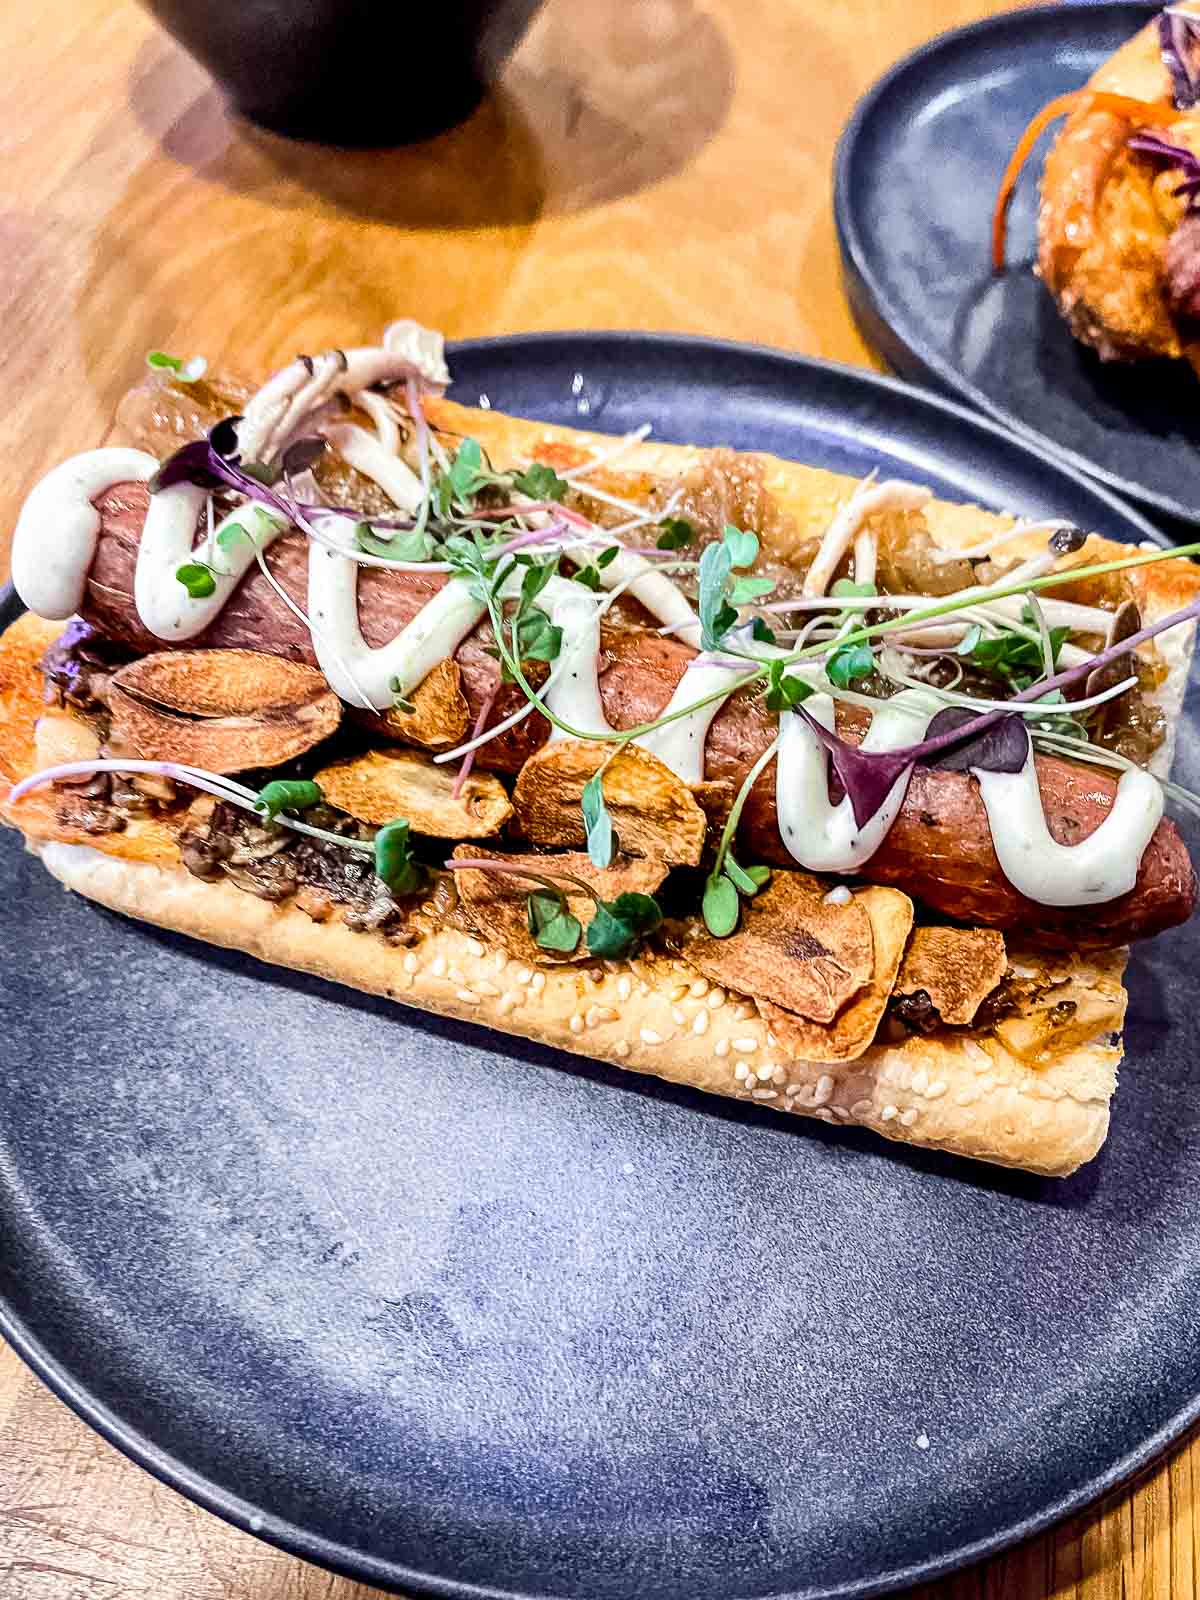 25 Best Vegan Restaurants in Vancouver BC for 2023 - Hot dog from Good Dogs Plant Foods